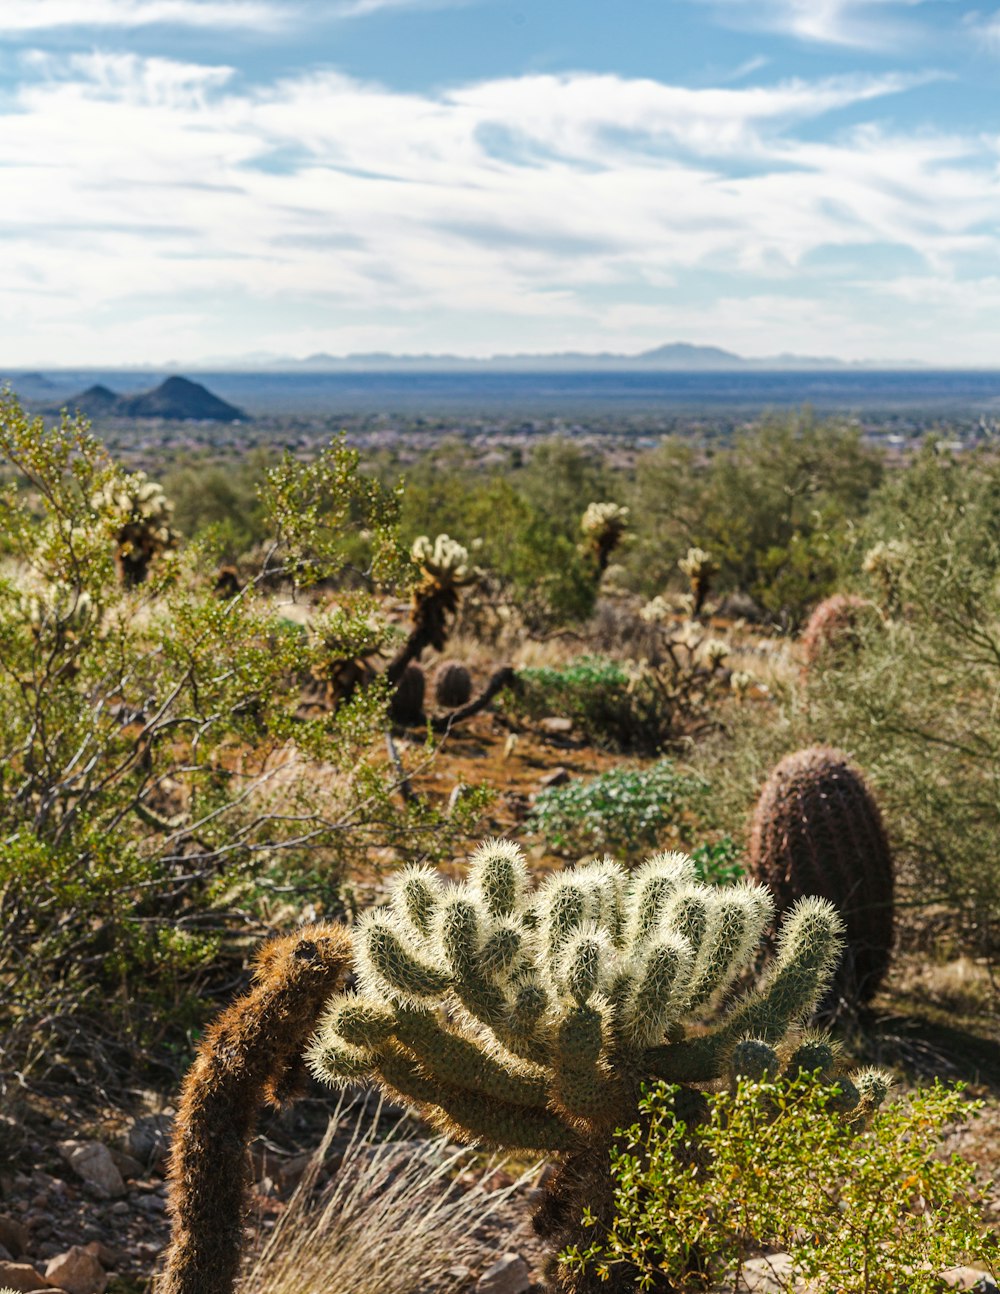 a cactus in the desert with mountains in the background